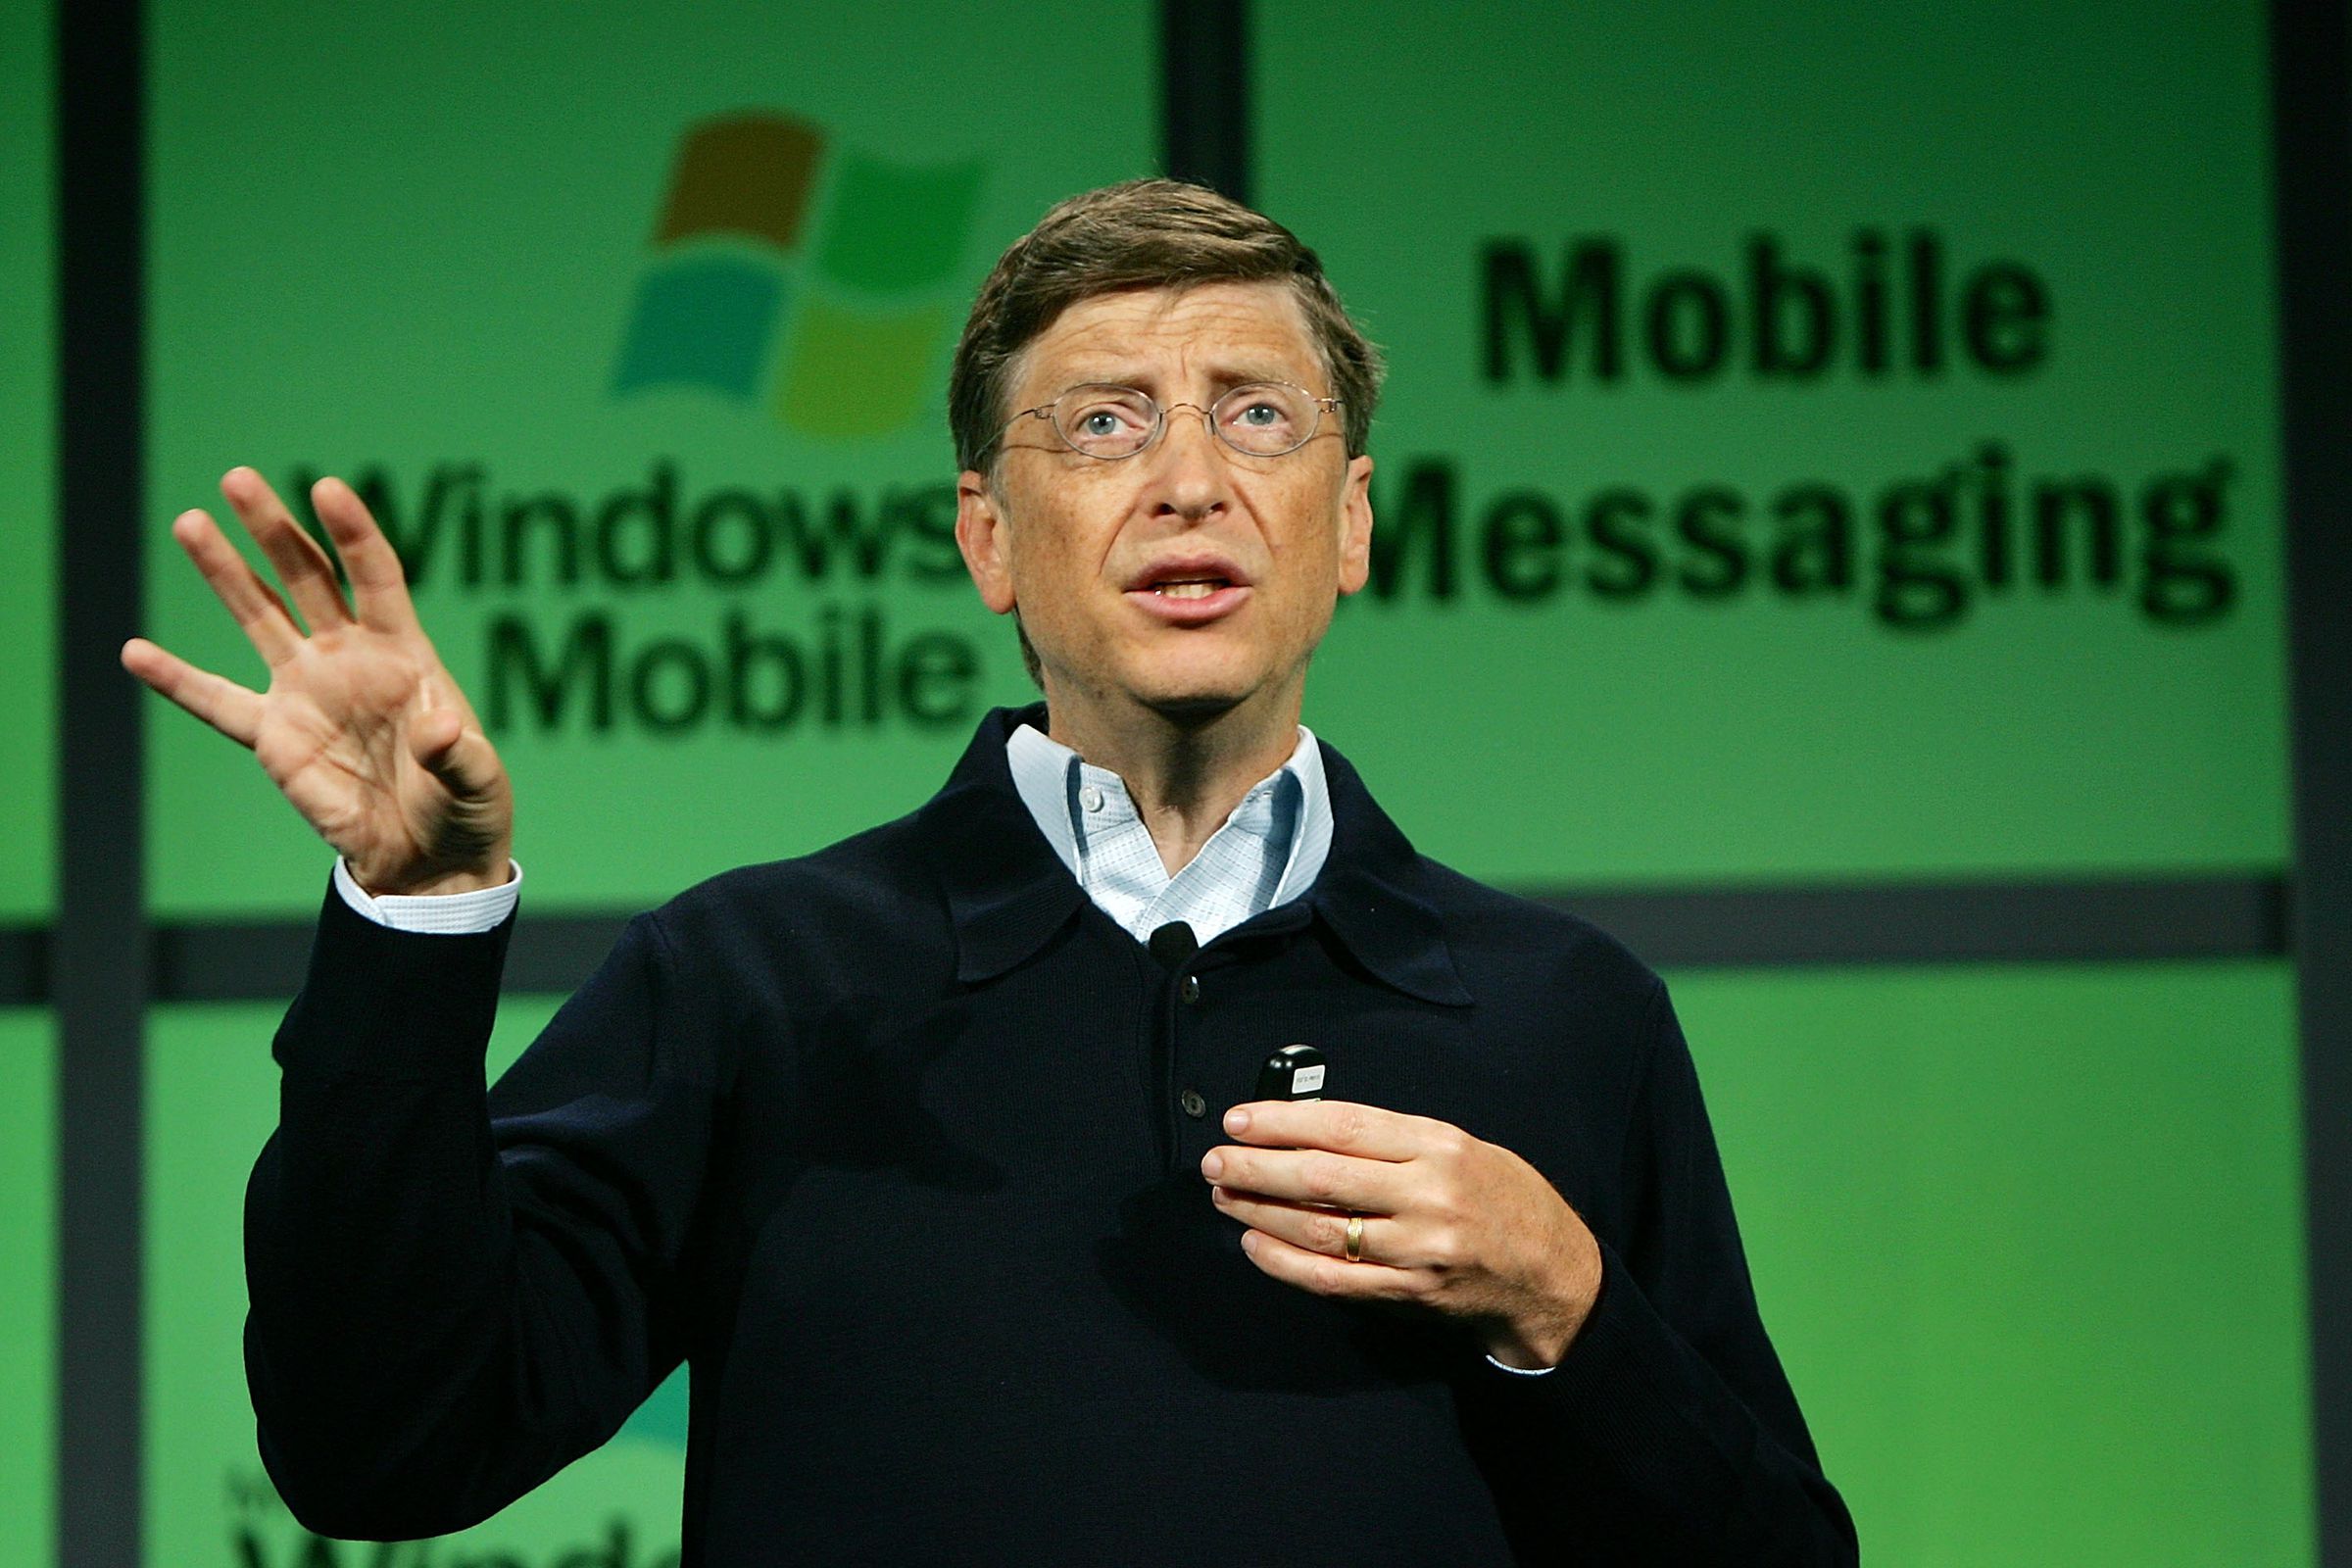 Bill Gates Introduces Microsofts Mobile 5.0 Software